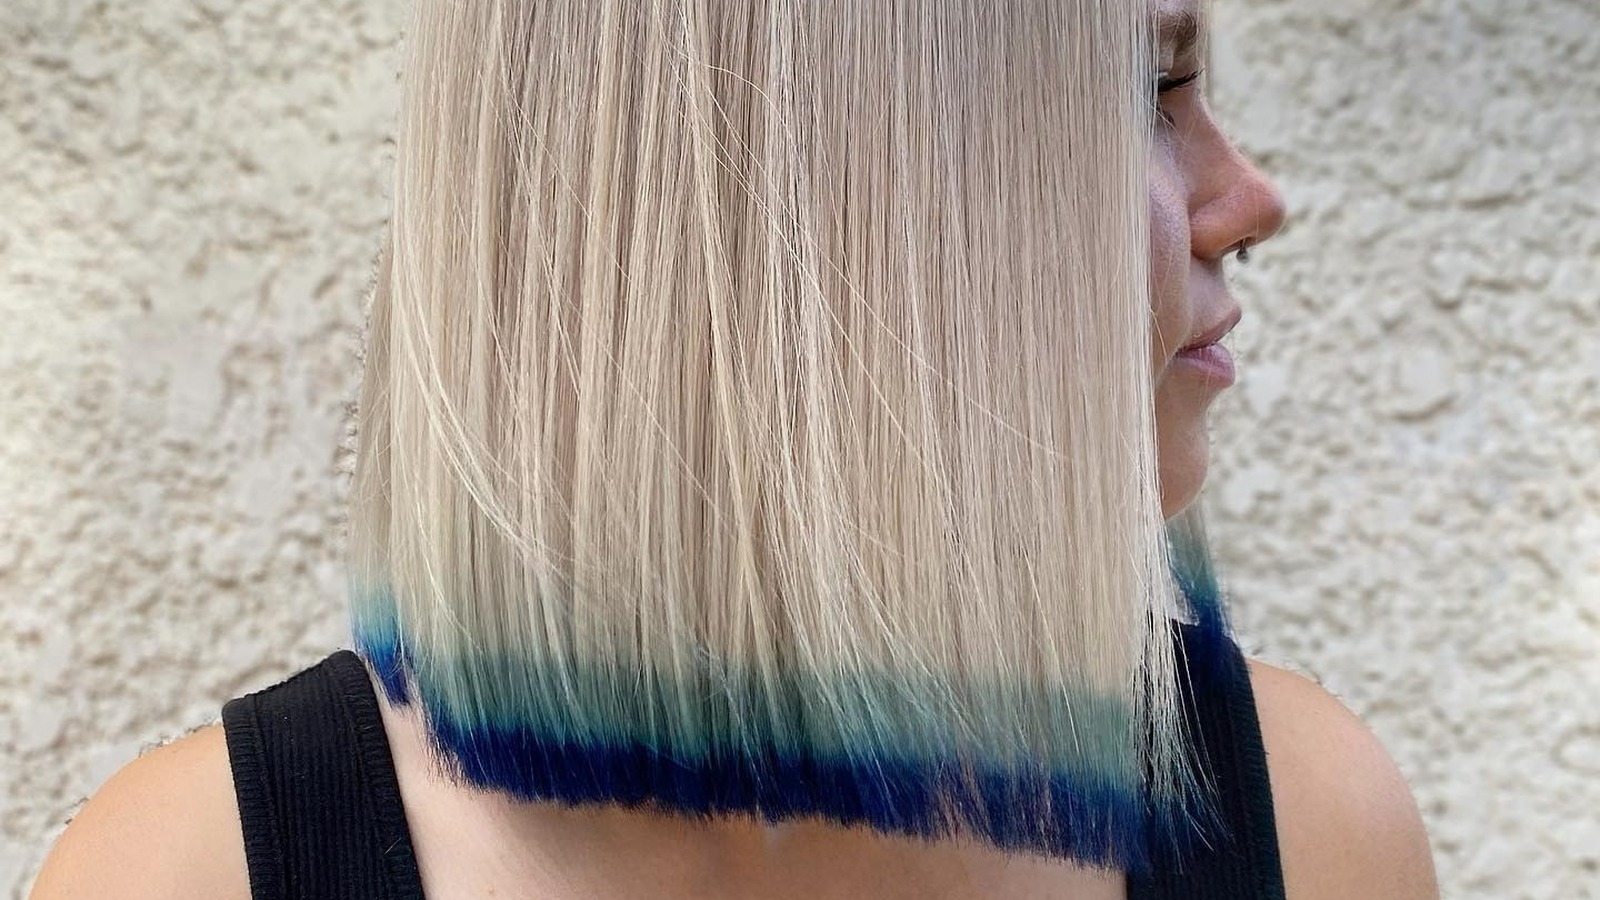 1. "How to Achieve Pink and Blue Dip Dyed Hair at Home" - wide 7